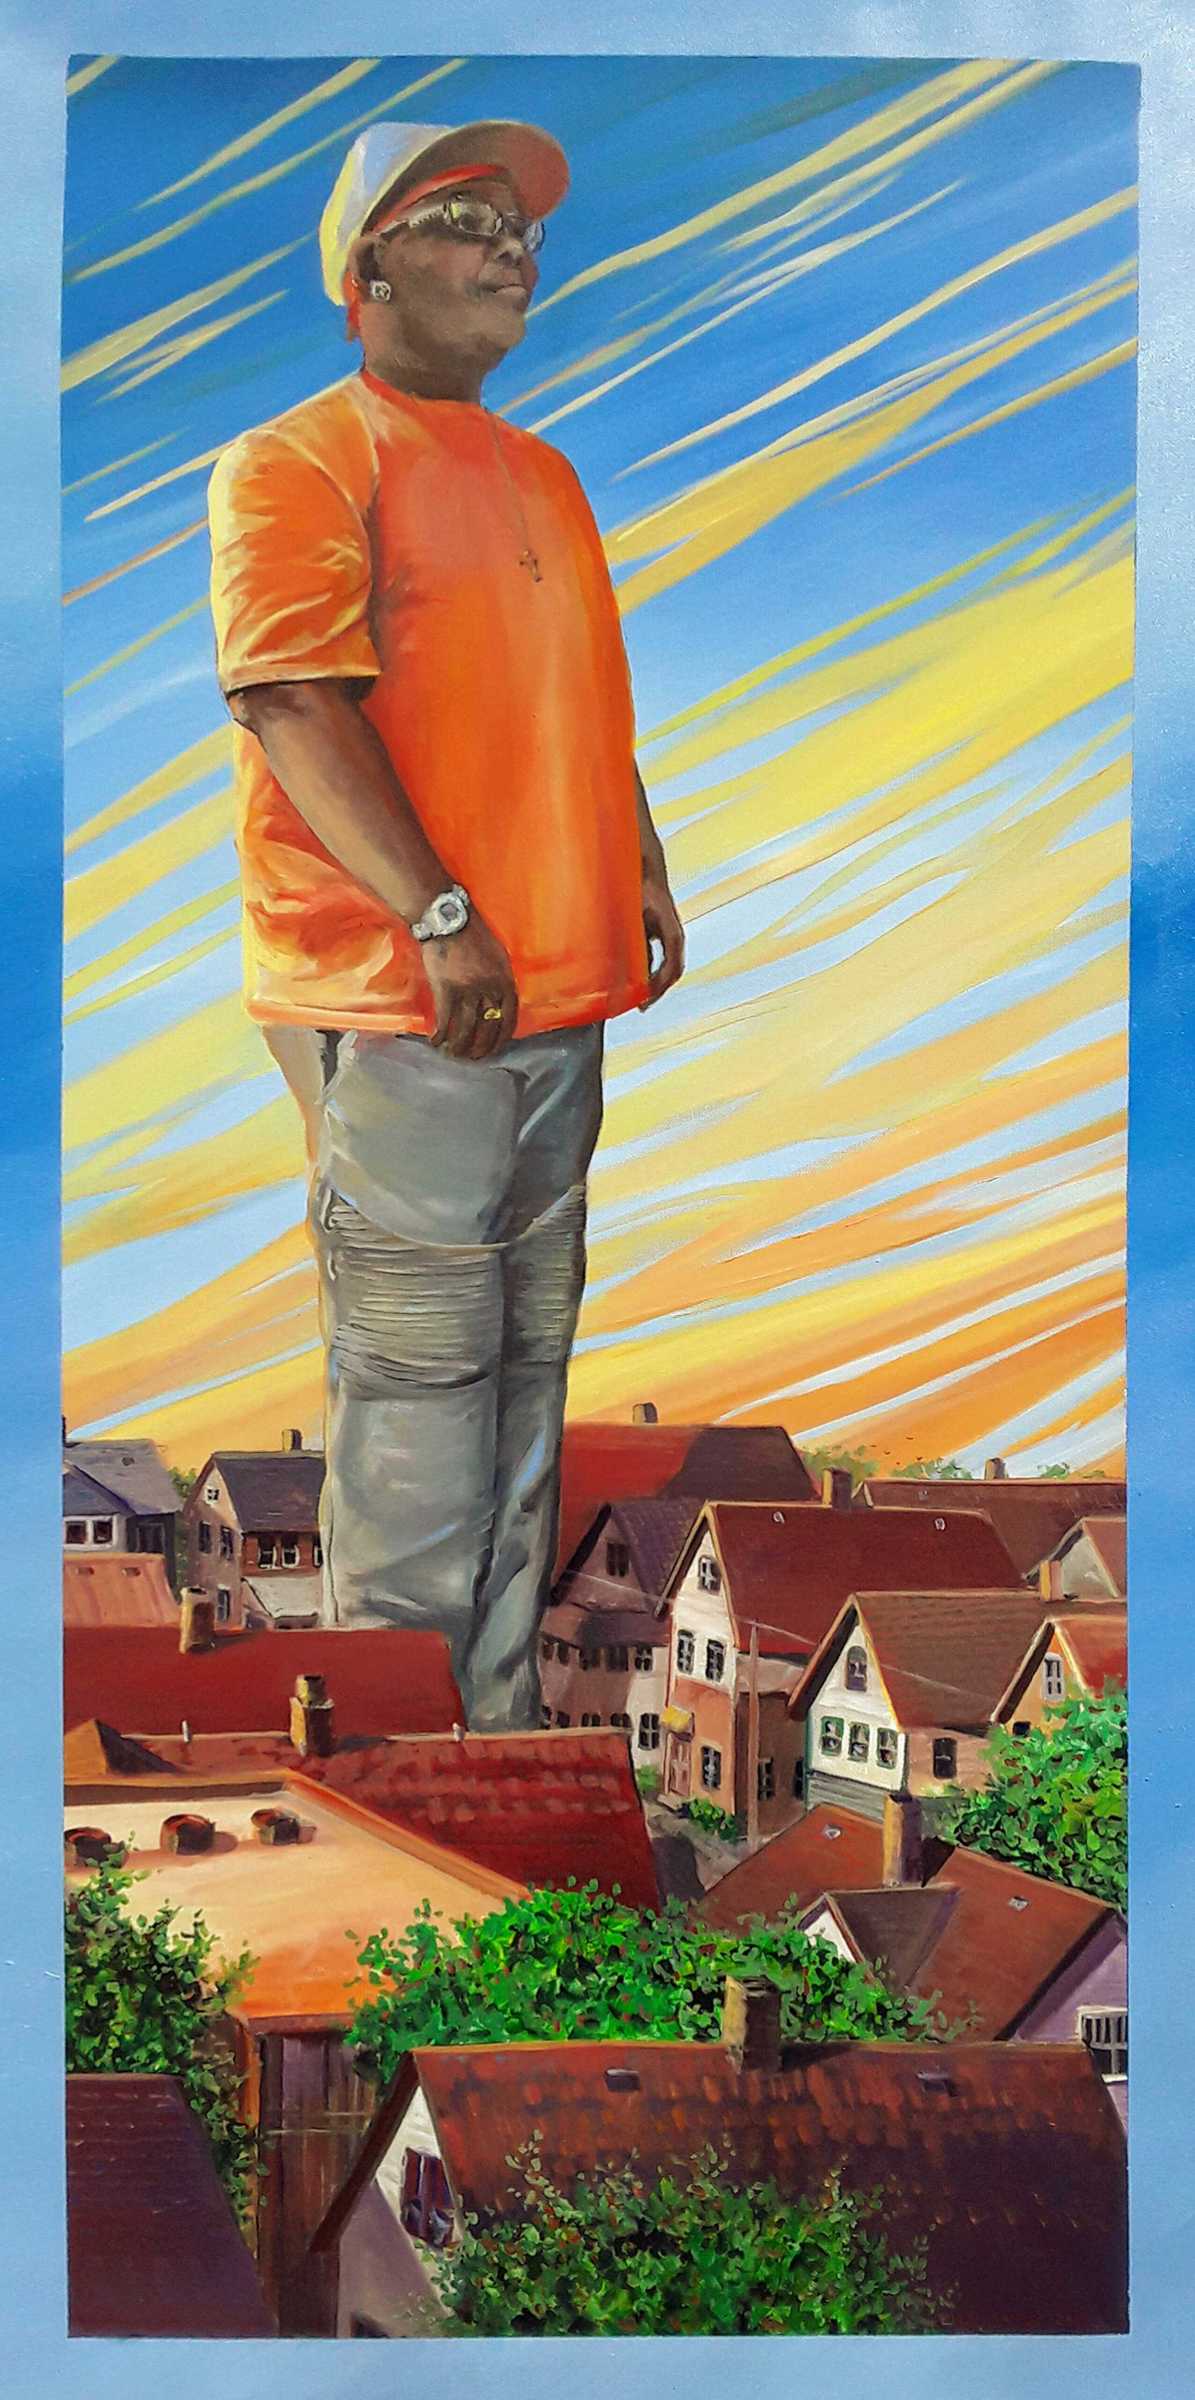 A painting of a Black woman wearing an orange T-shirt, jeans, and a baseball cap, standing tall above the buildings of a town.